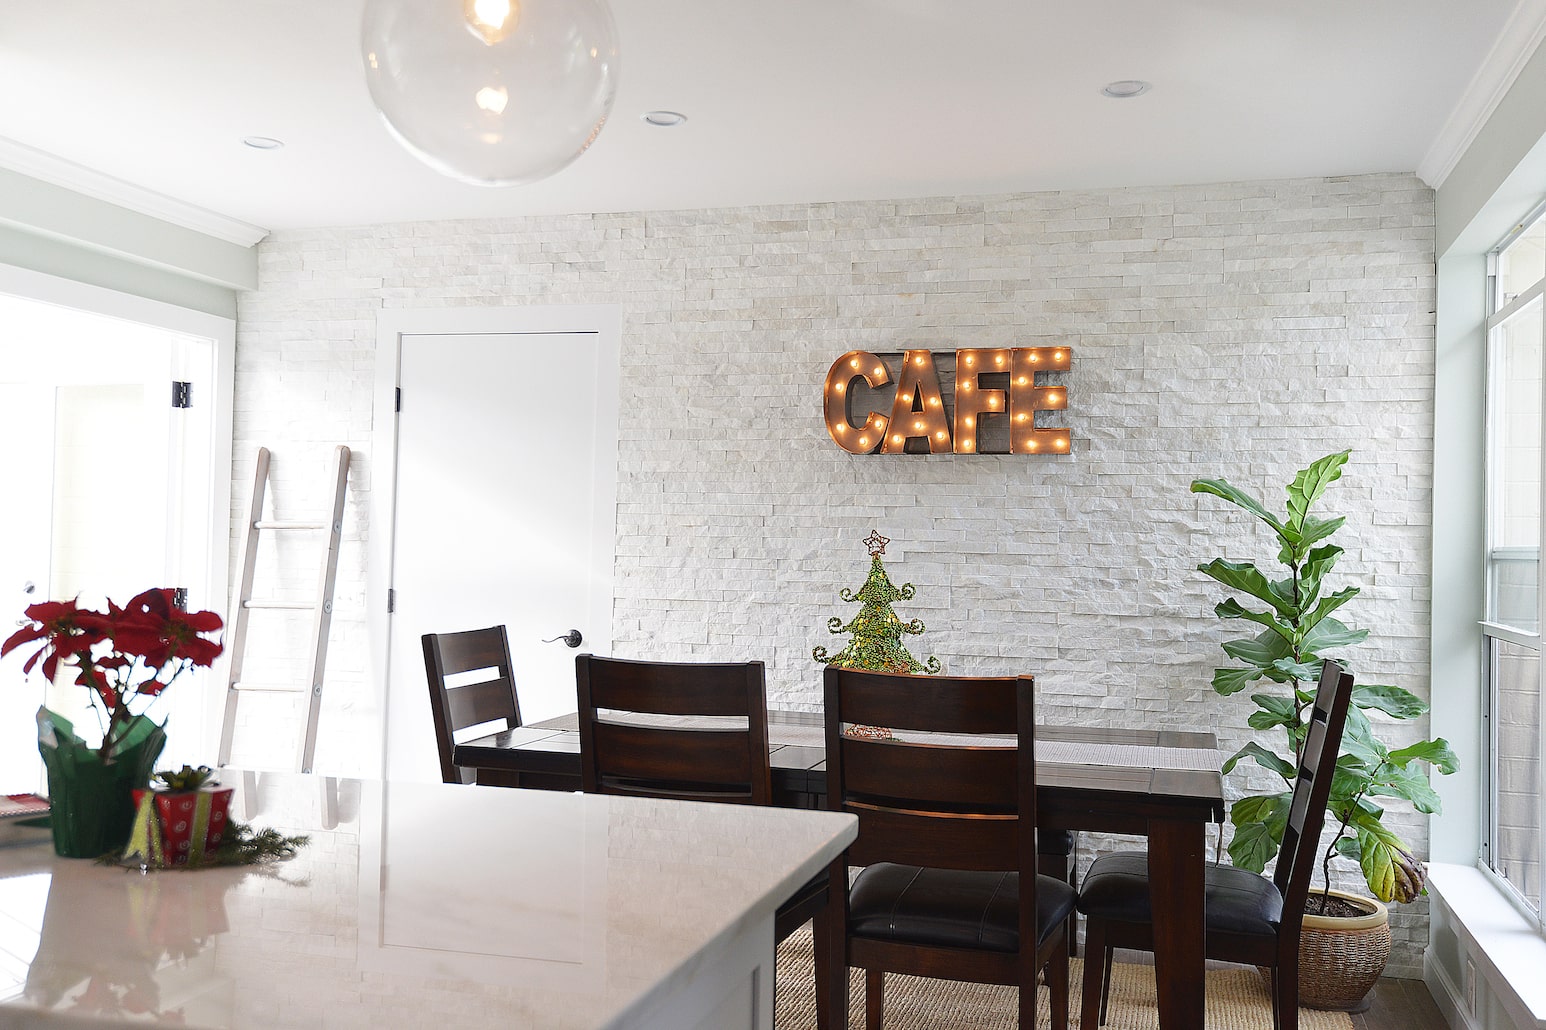 Norstone White Rock Panels on a prominent feature wall in a cozy modern inspired kitchen and dining area